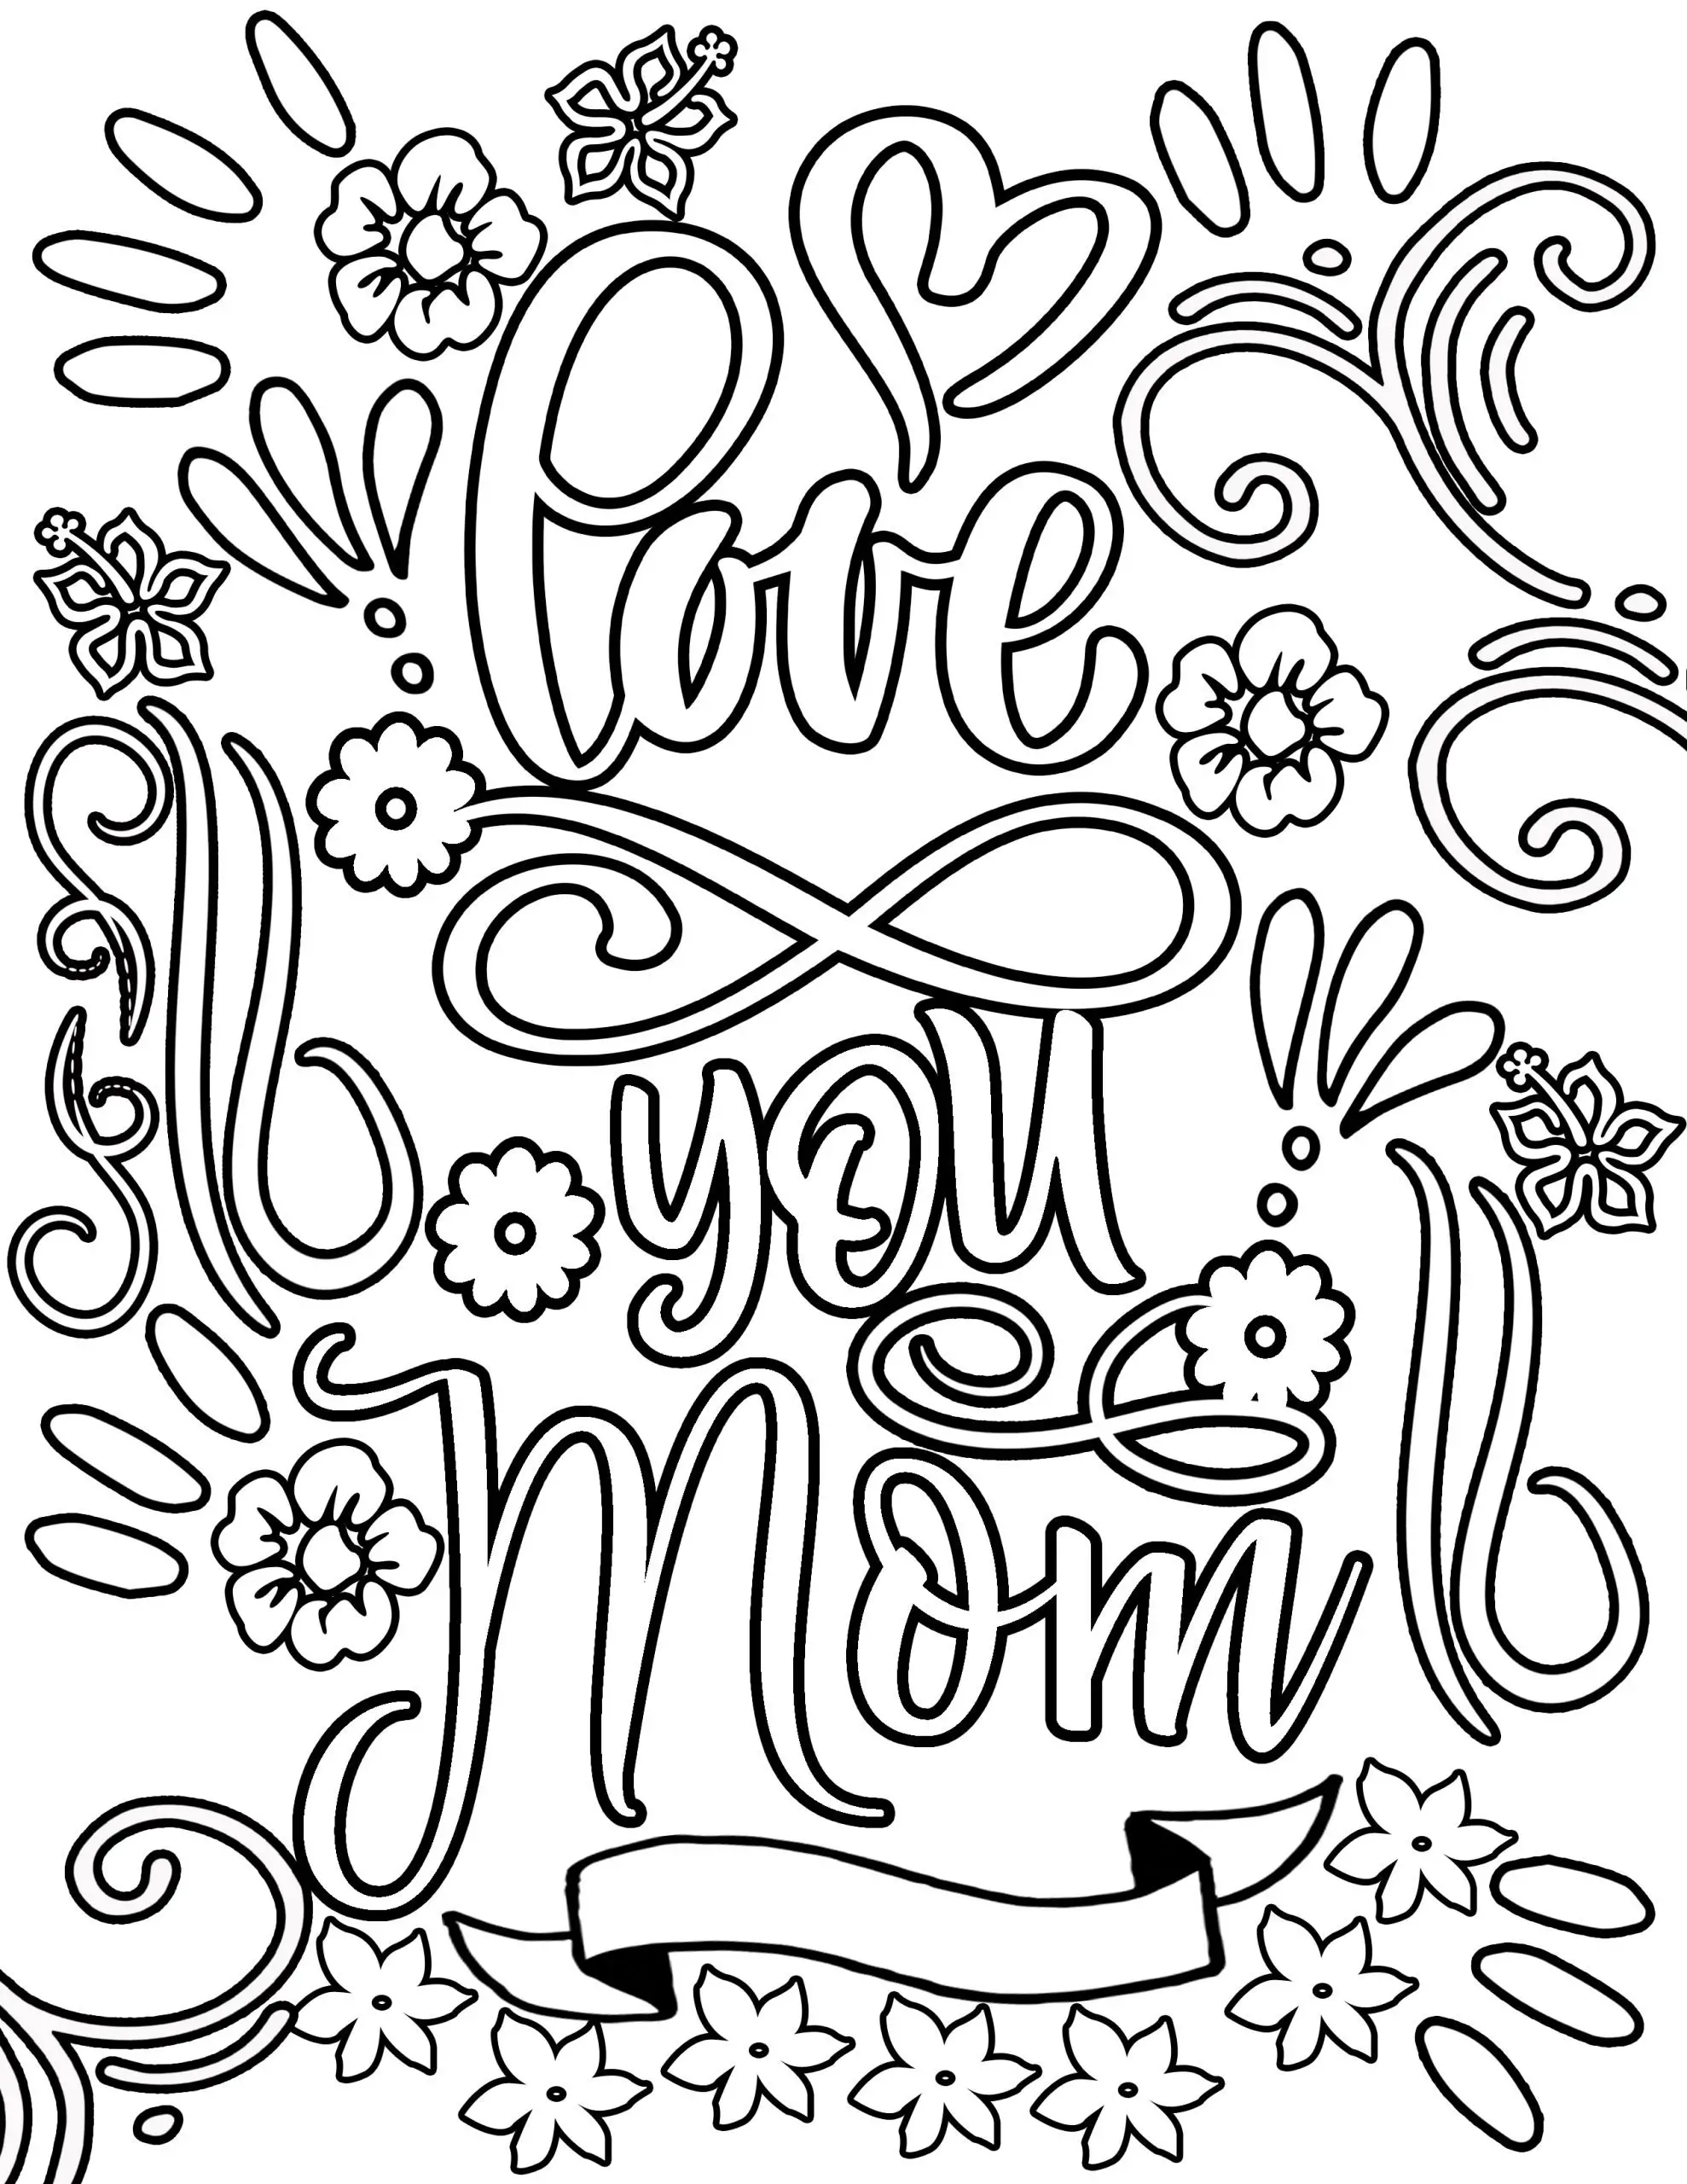 LOVE YOU MOM MOTHER'S DAY flower with vines and frills Clipart Coloring Pages for Kids Adults Art Activities Line Art